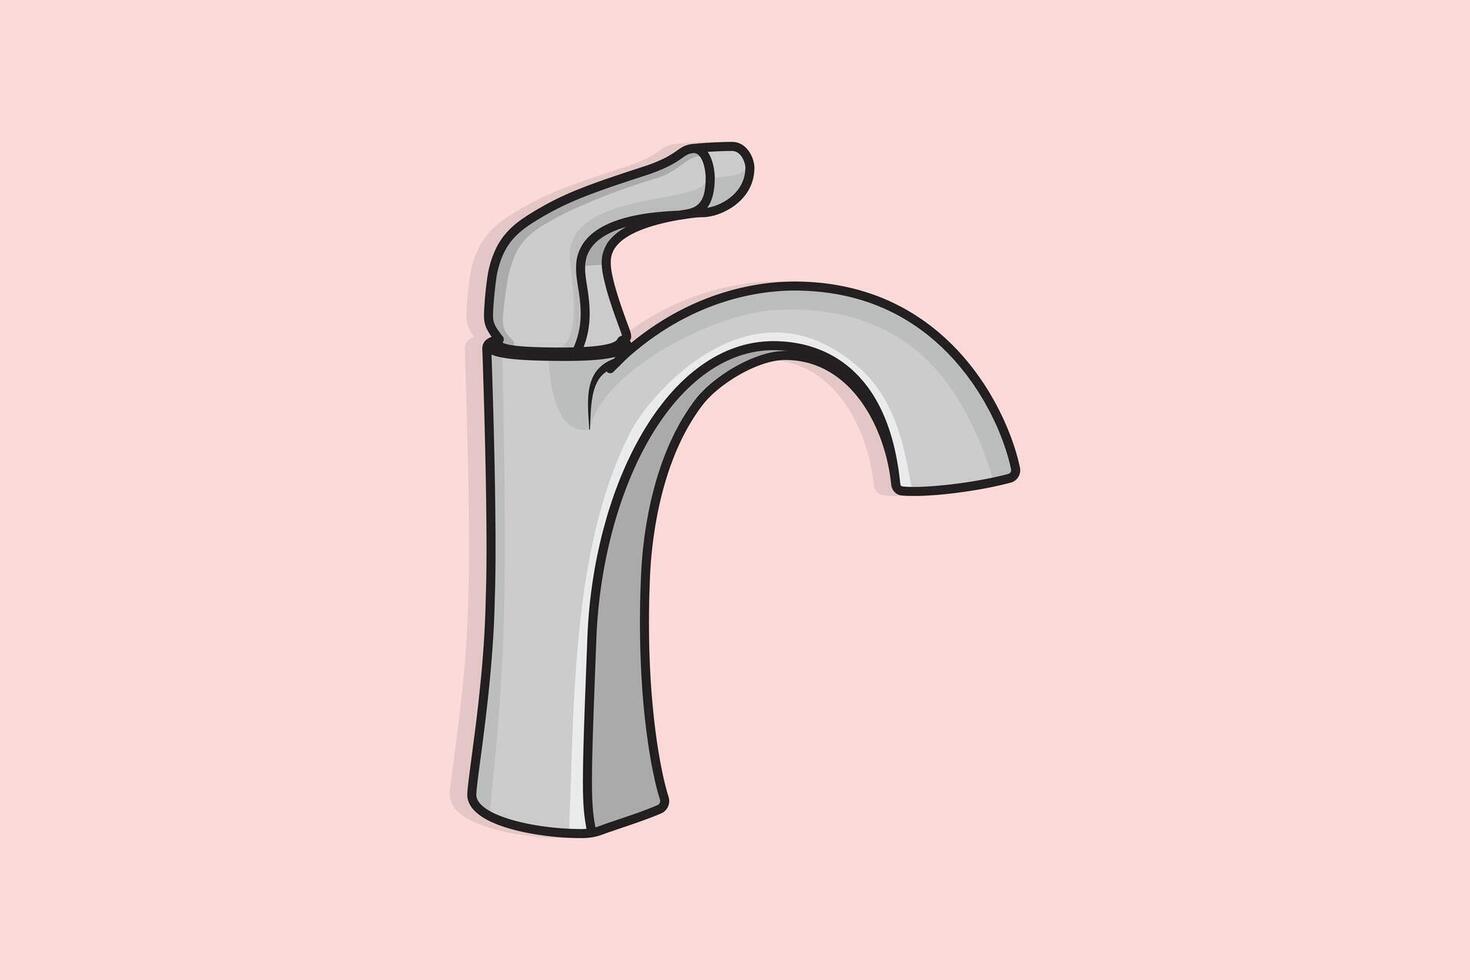 Steel Water Supply Faucets For Bathroom And Kitchen Sink vector illustration. Home interior objects icon concept. Kitchen faucet icon , bathroom icon logo design.